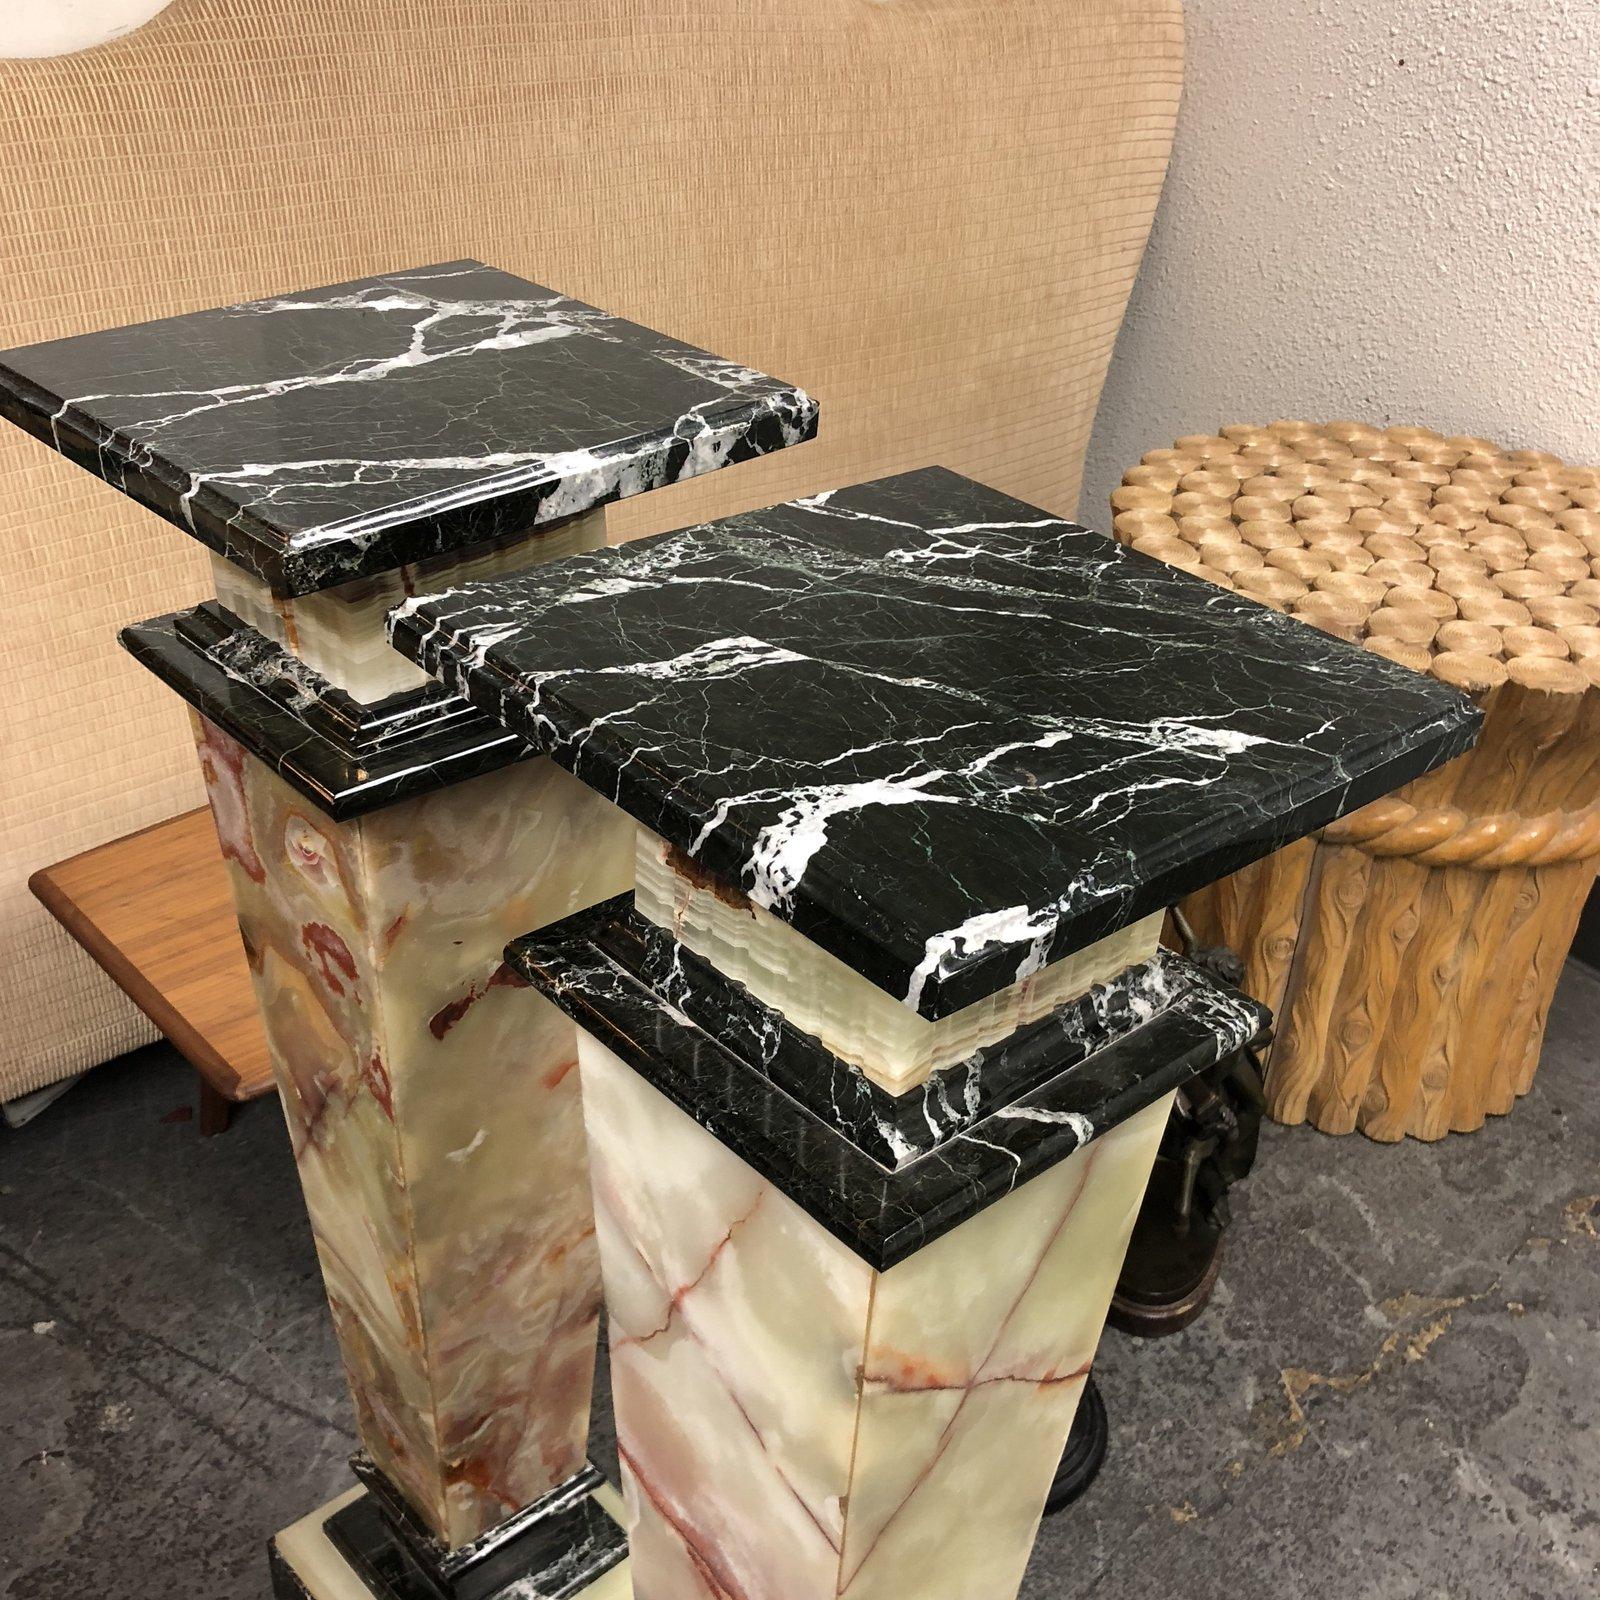 A pair of marble pedestals. Just Stunning! These two-toned marble beauties are a must have. Narrow and tall with tapered square shape. Each pedestal has three pieces that sits comfortably on each other to form this elegant and striking design. One